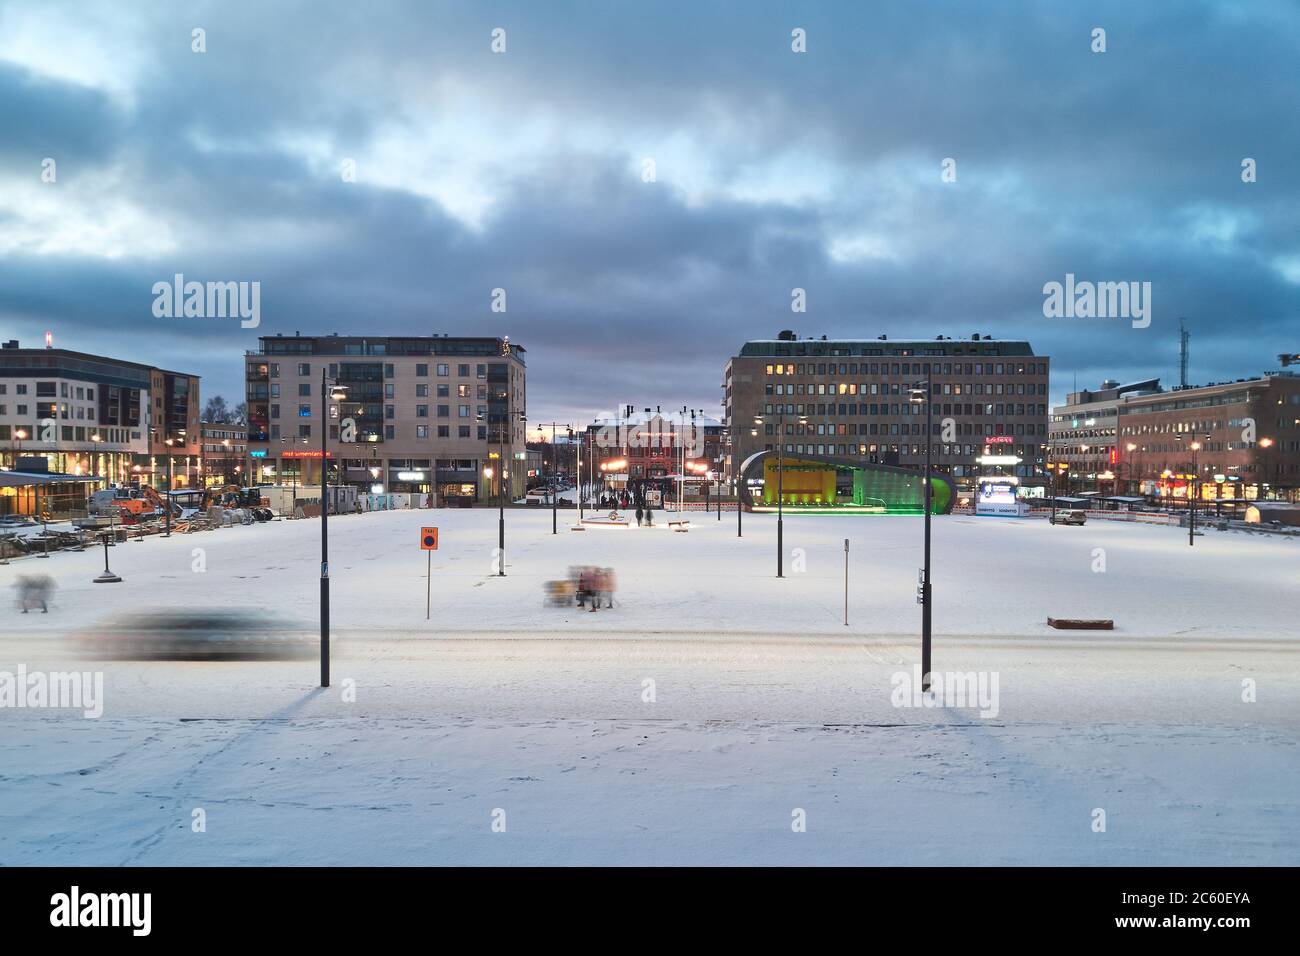 Joensuu, Finland - November 24, 2018: Aerial view of brand new outdoor stage and the market square. Stock Photo